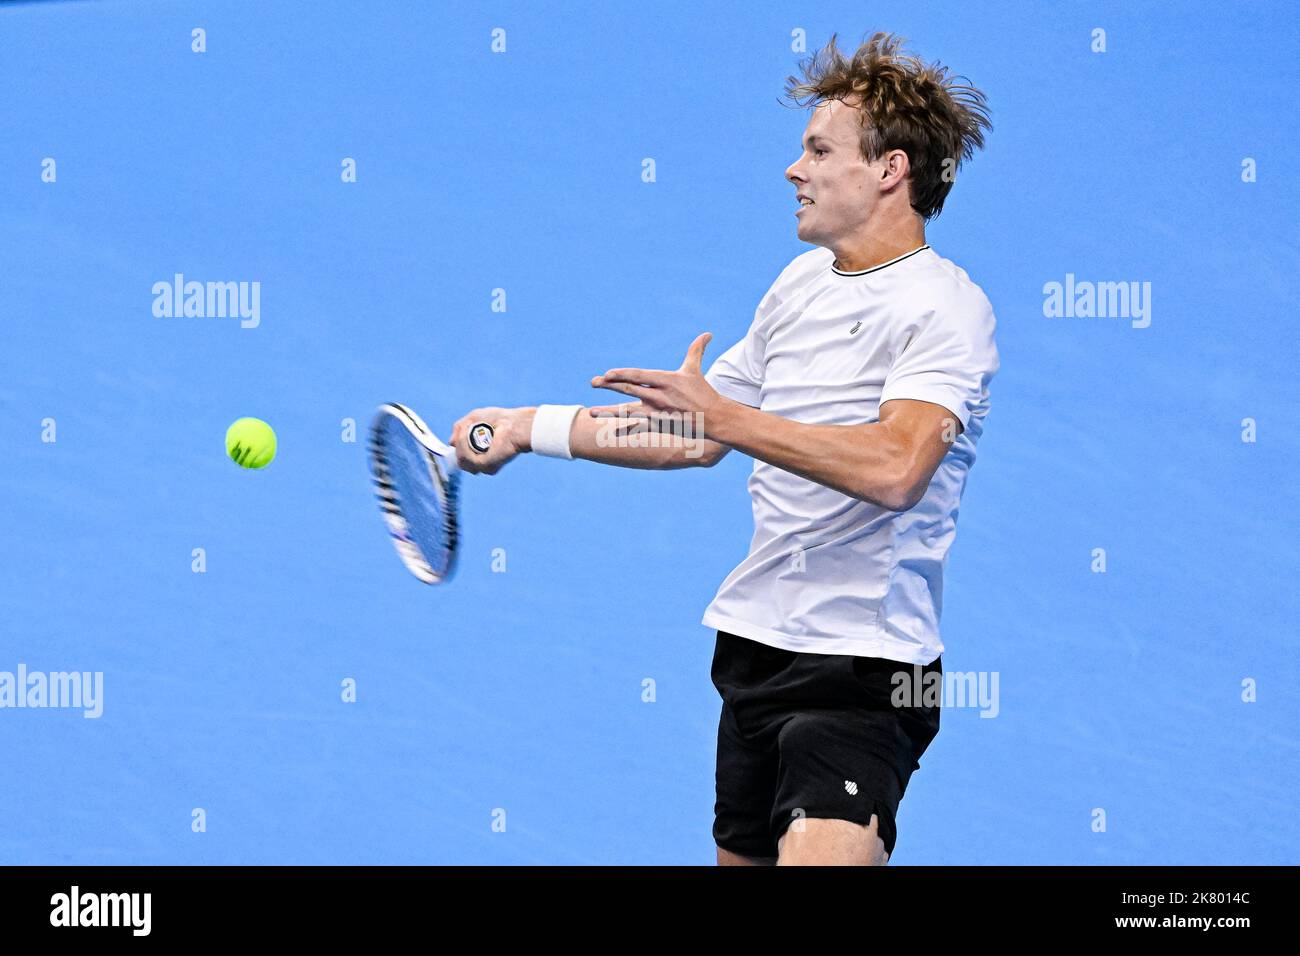 Belgian Michael Geerts pictured in action during a match between American Brooksby and Belgian Geerts, in the qualifications for the European Open Tennis ATP tournament, in Antwerp, Sunday 17 October 2021